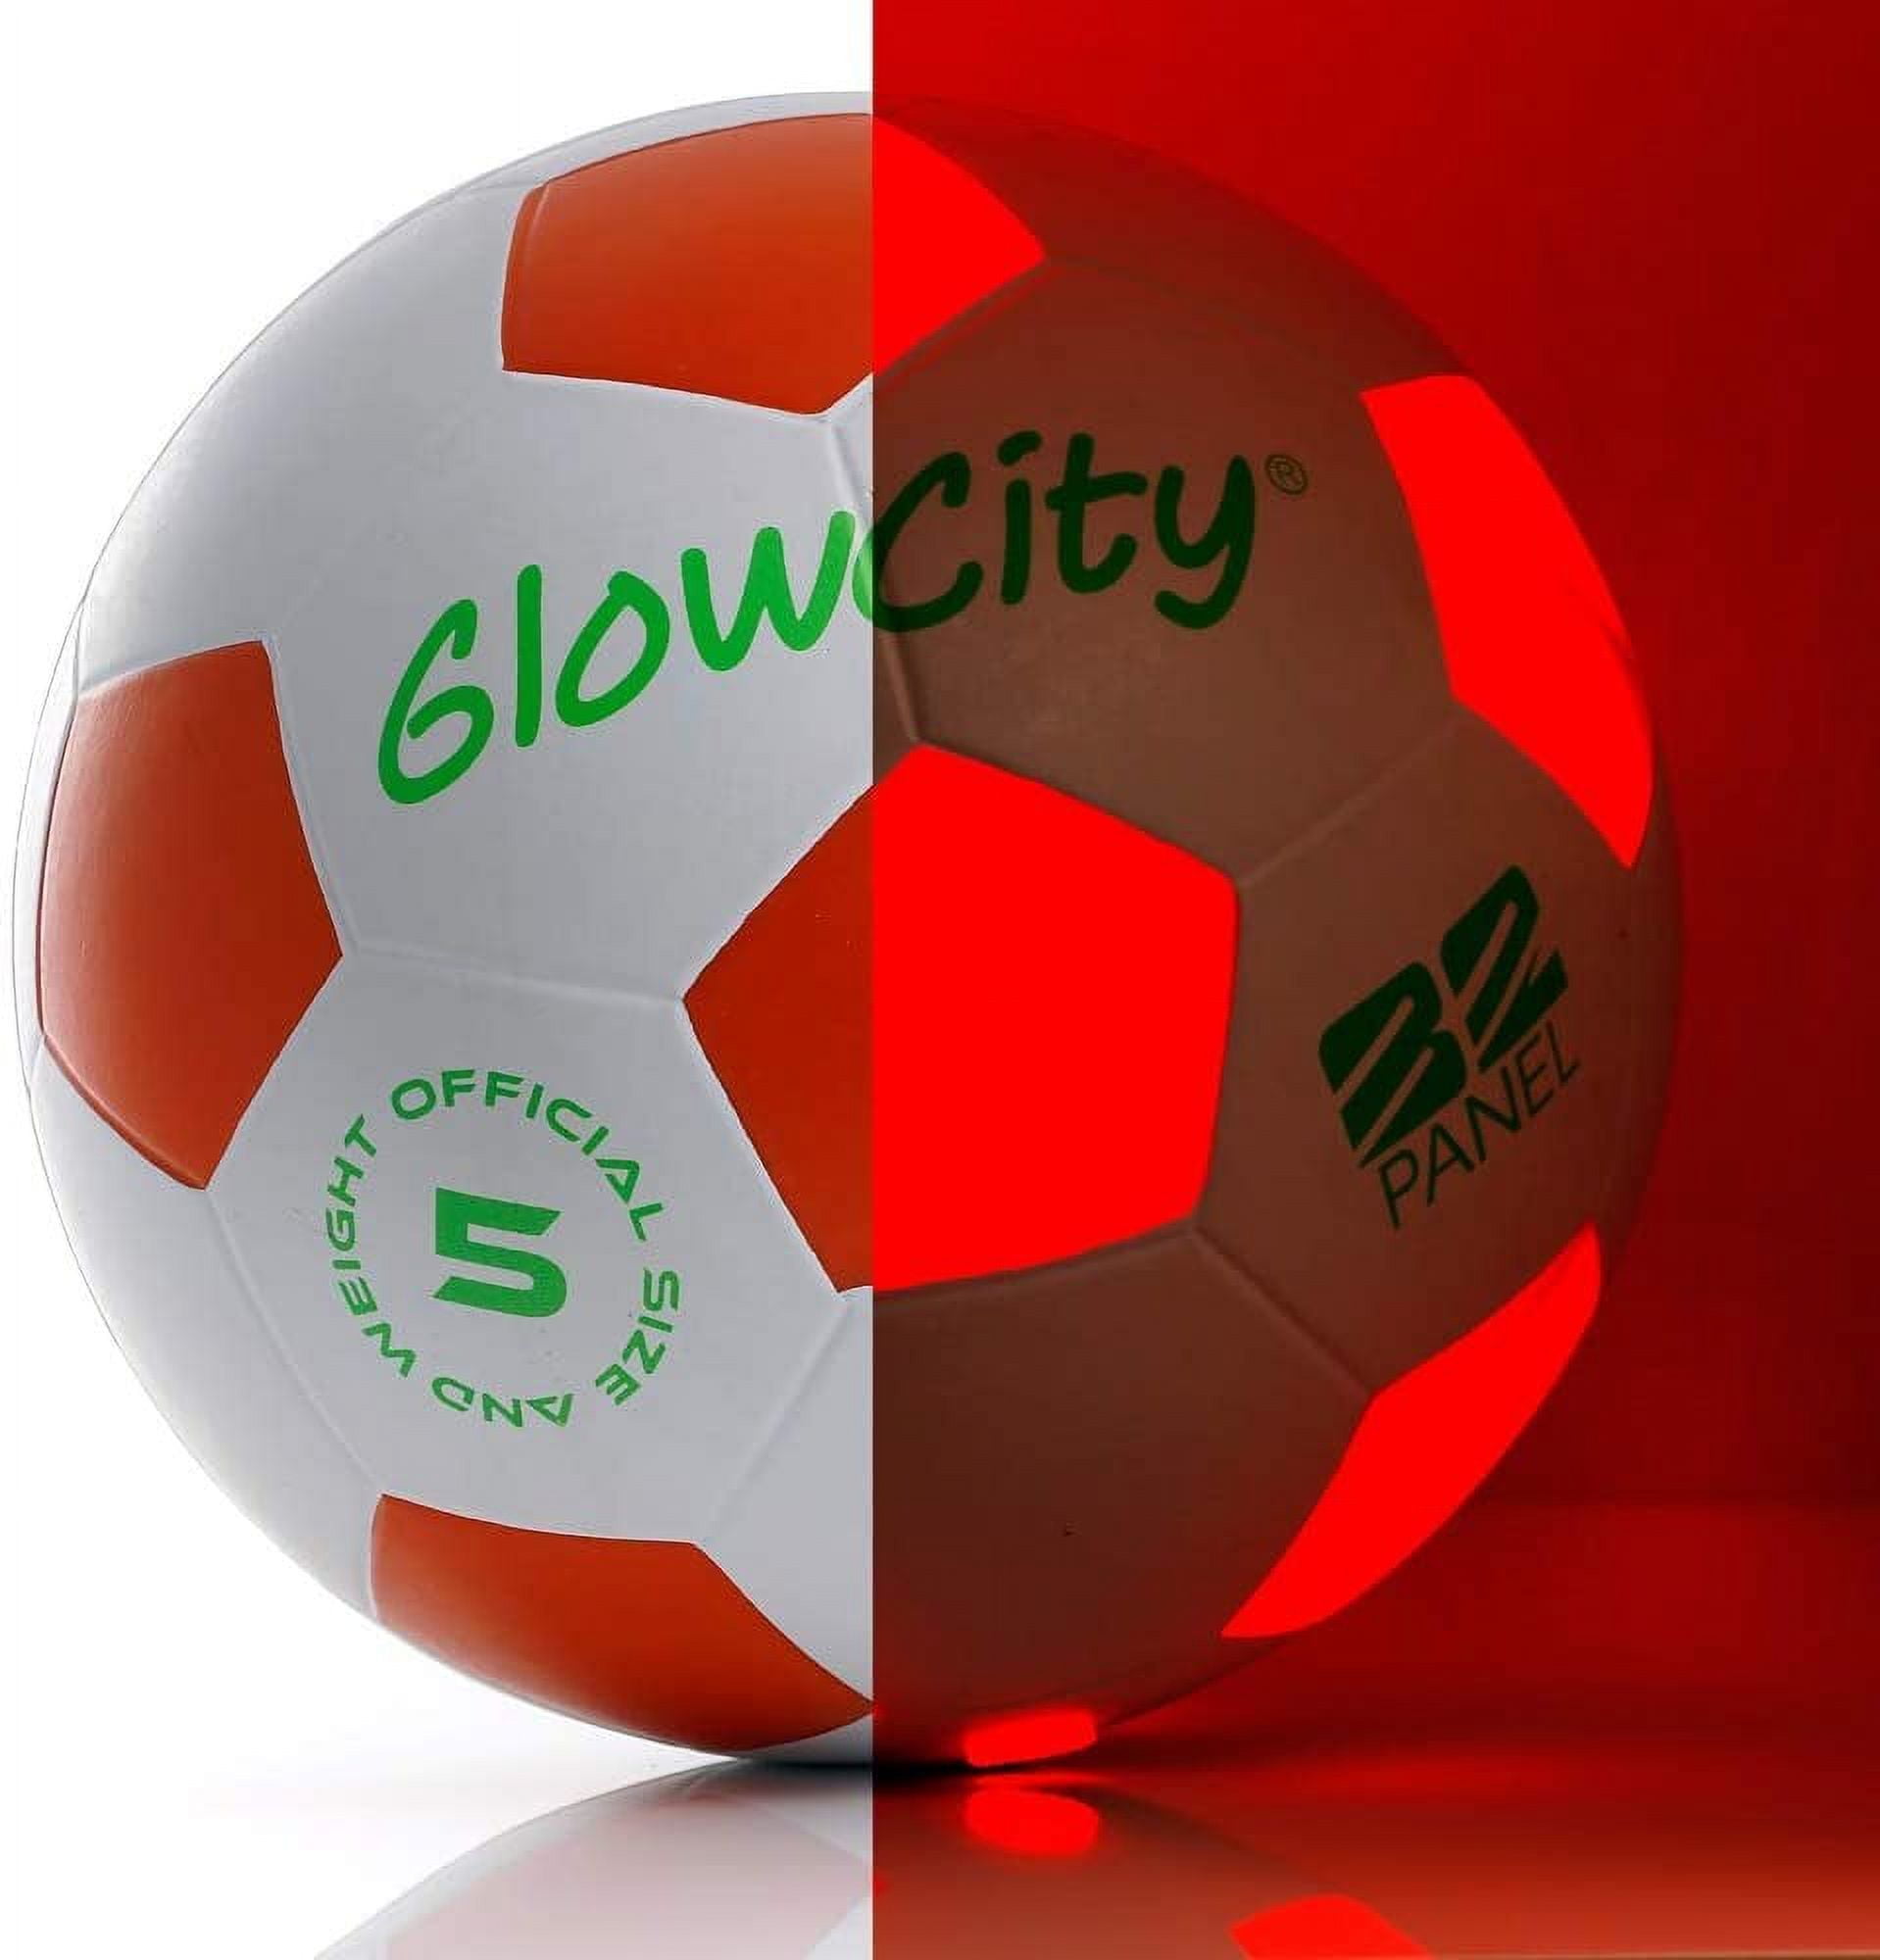 GlowCity Light Up LED Soccer Ball, Glow in The Dark, Size 5, Batteries  Included